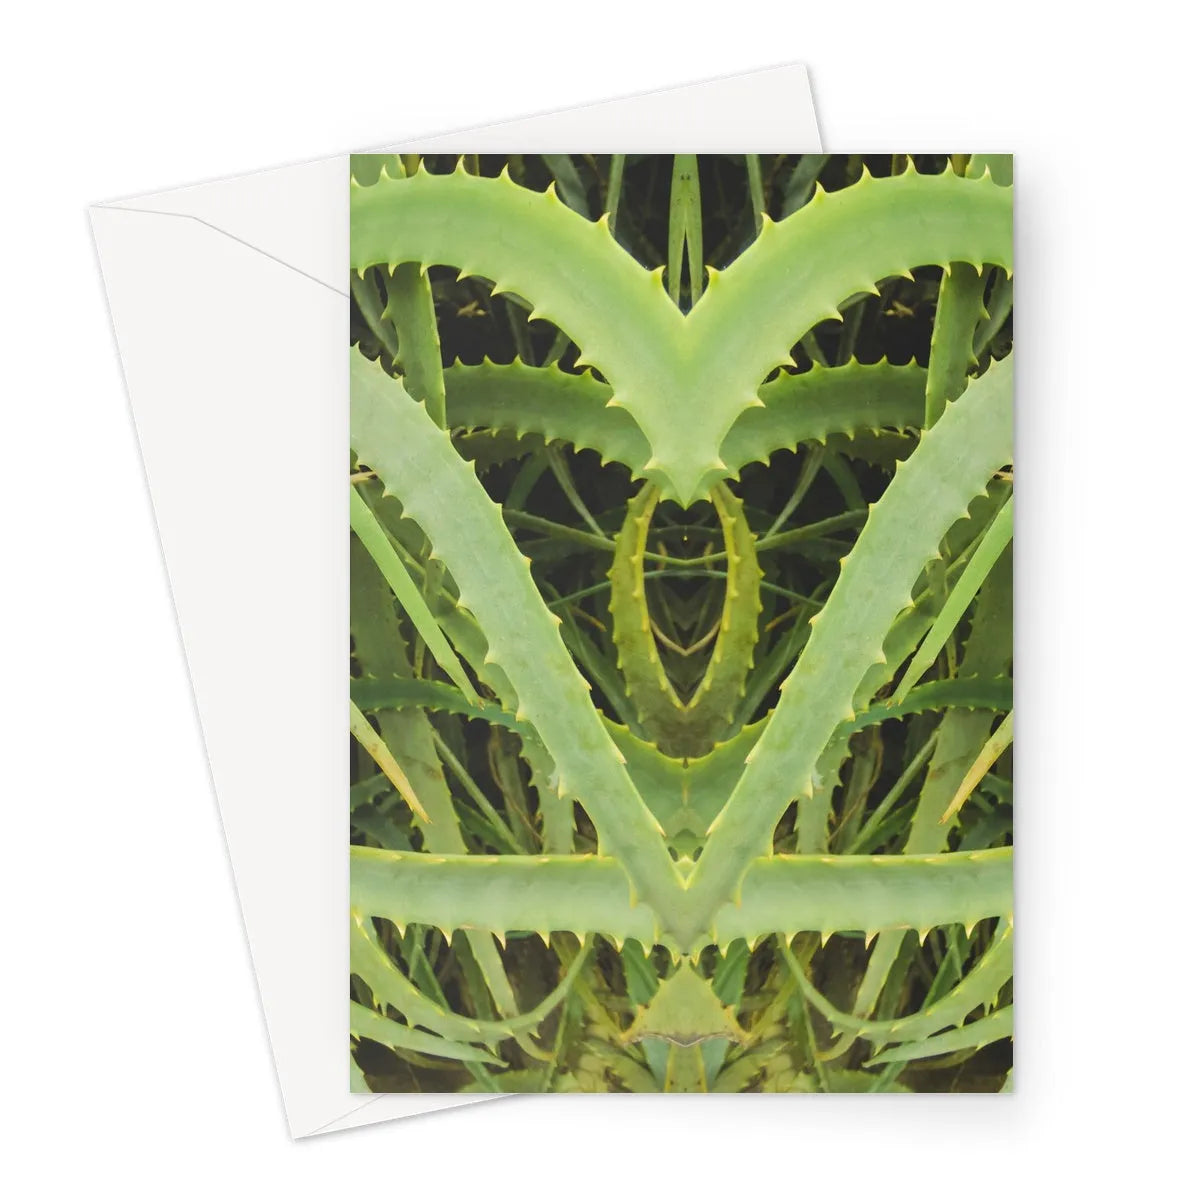 Spiked Greeting Card - Greeting & Note Cards - Aesthetic Art